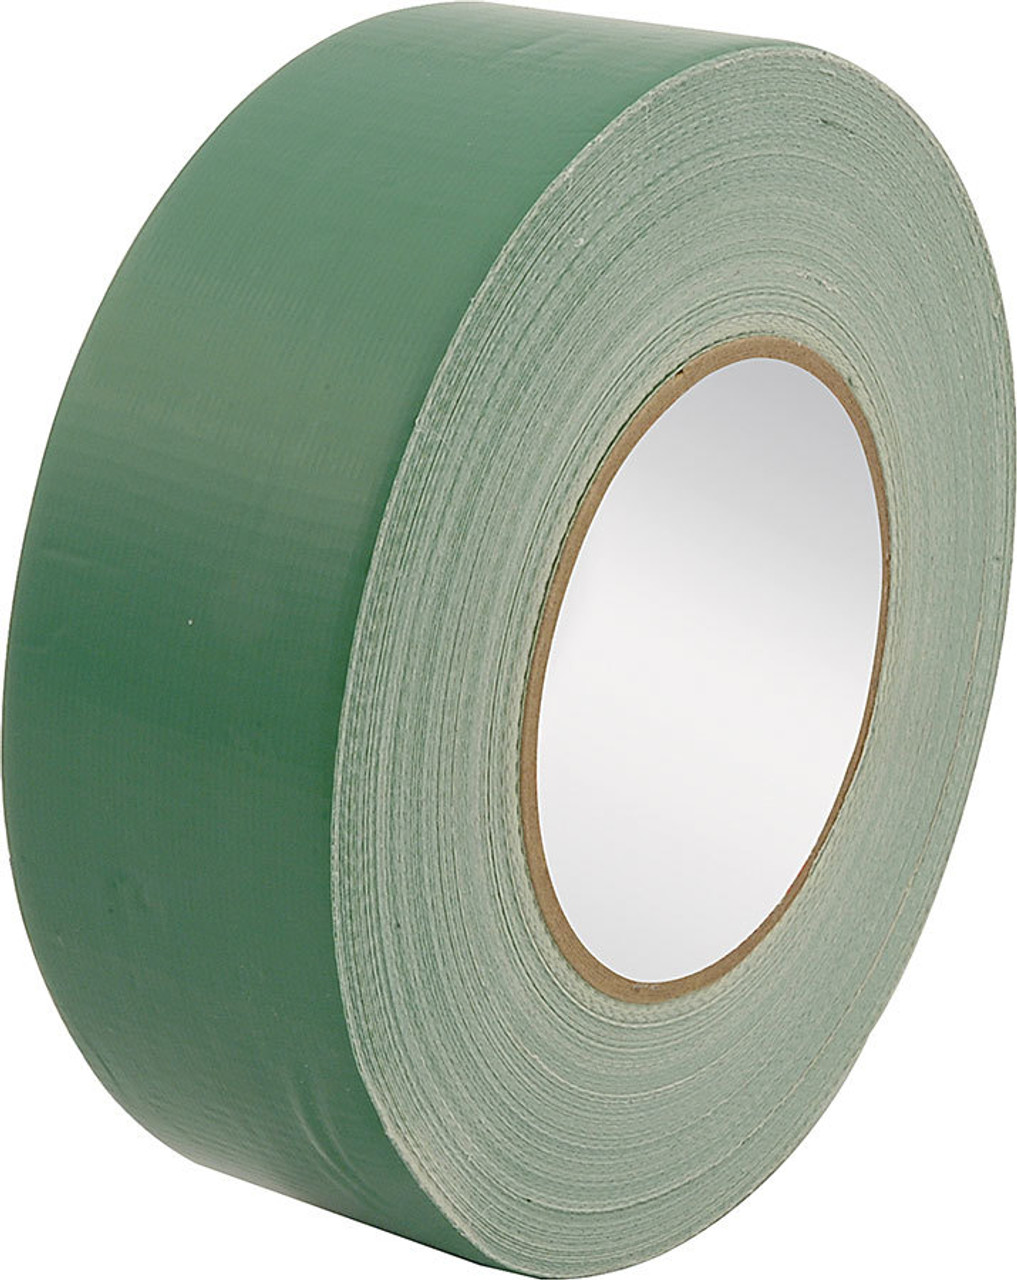 Racers Tape 2in x 180ft Green ALL14157